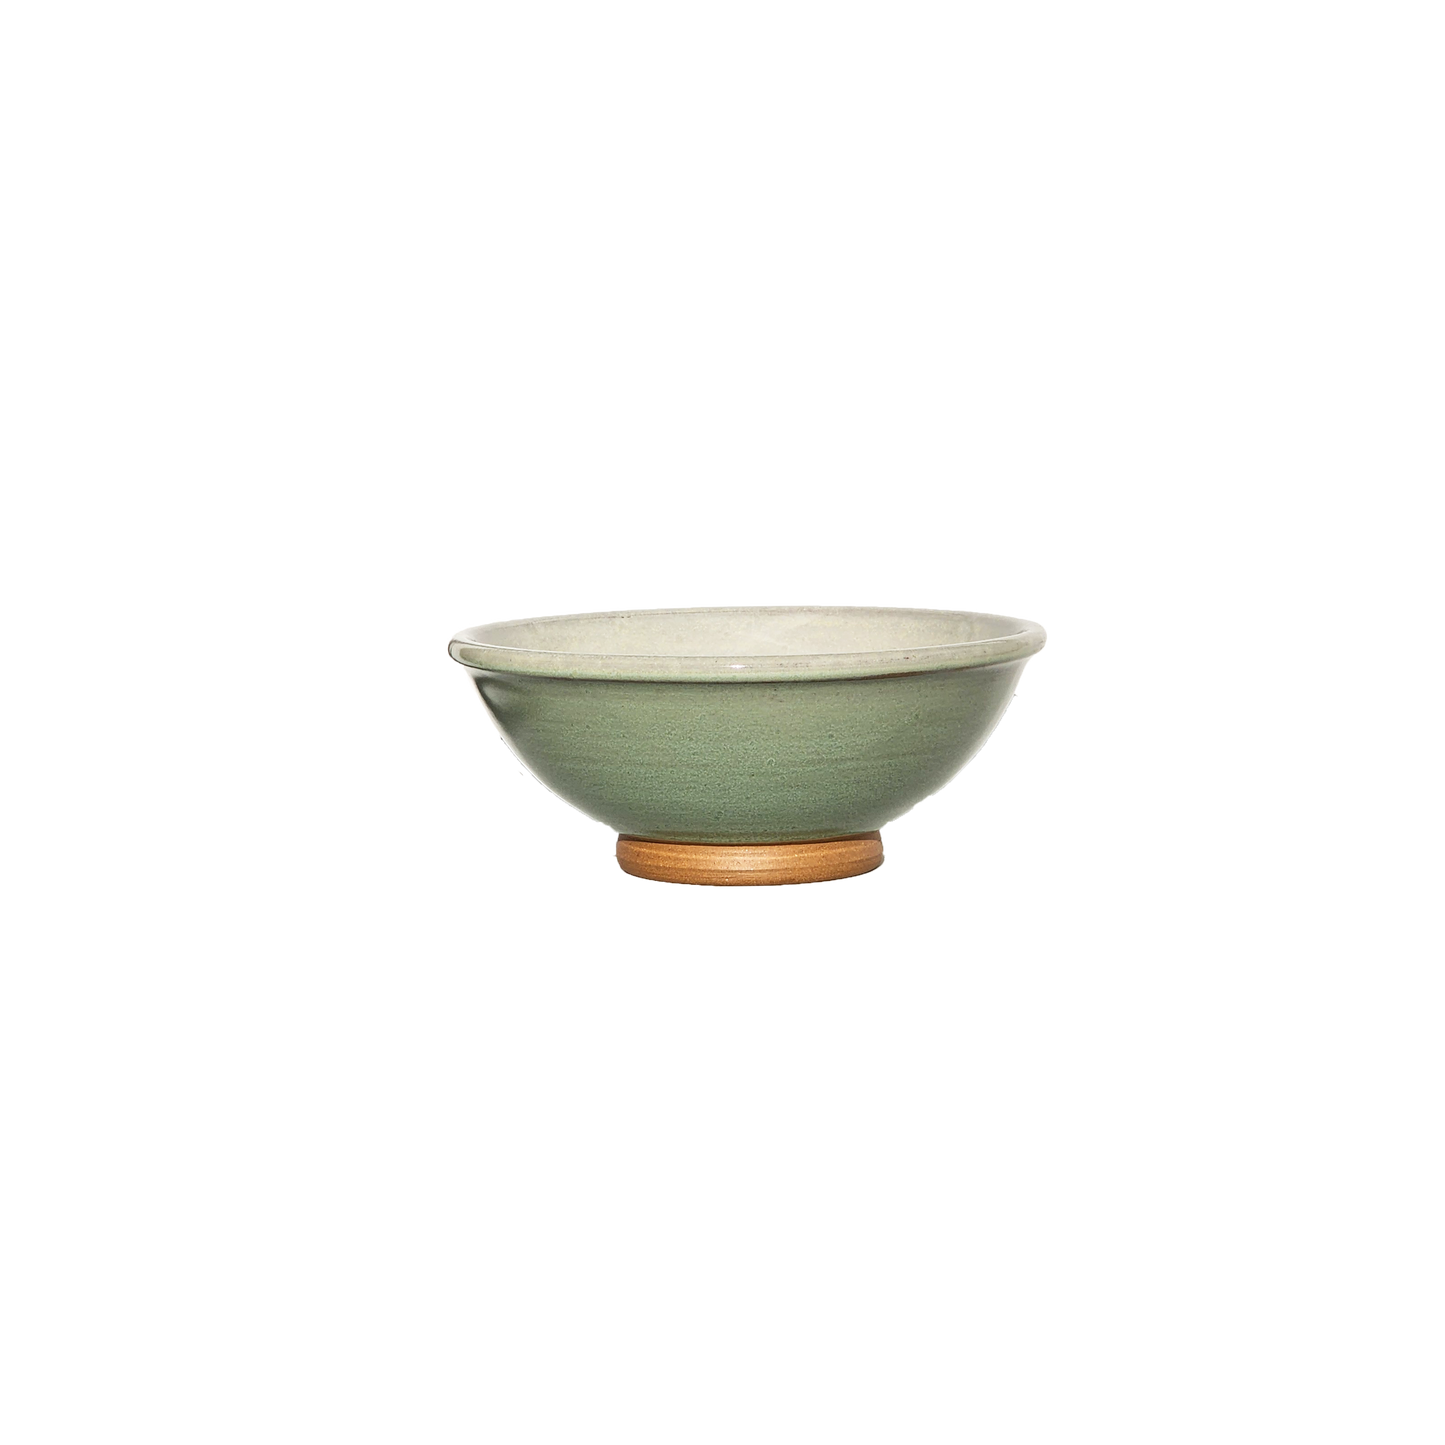 Image: A ceramic bowl in fresh light green, echoing the hues of spring foliage. Sized at 1 cup, it's perfect for serving small portions of snacks or desserts.